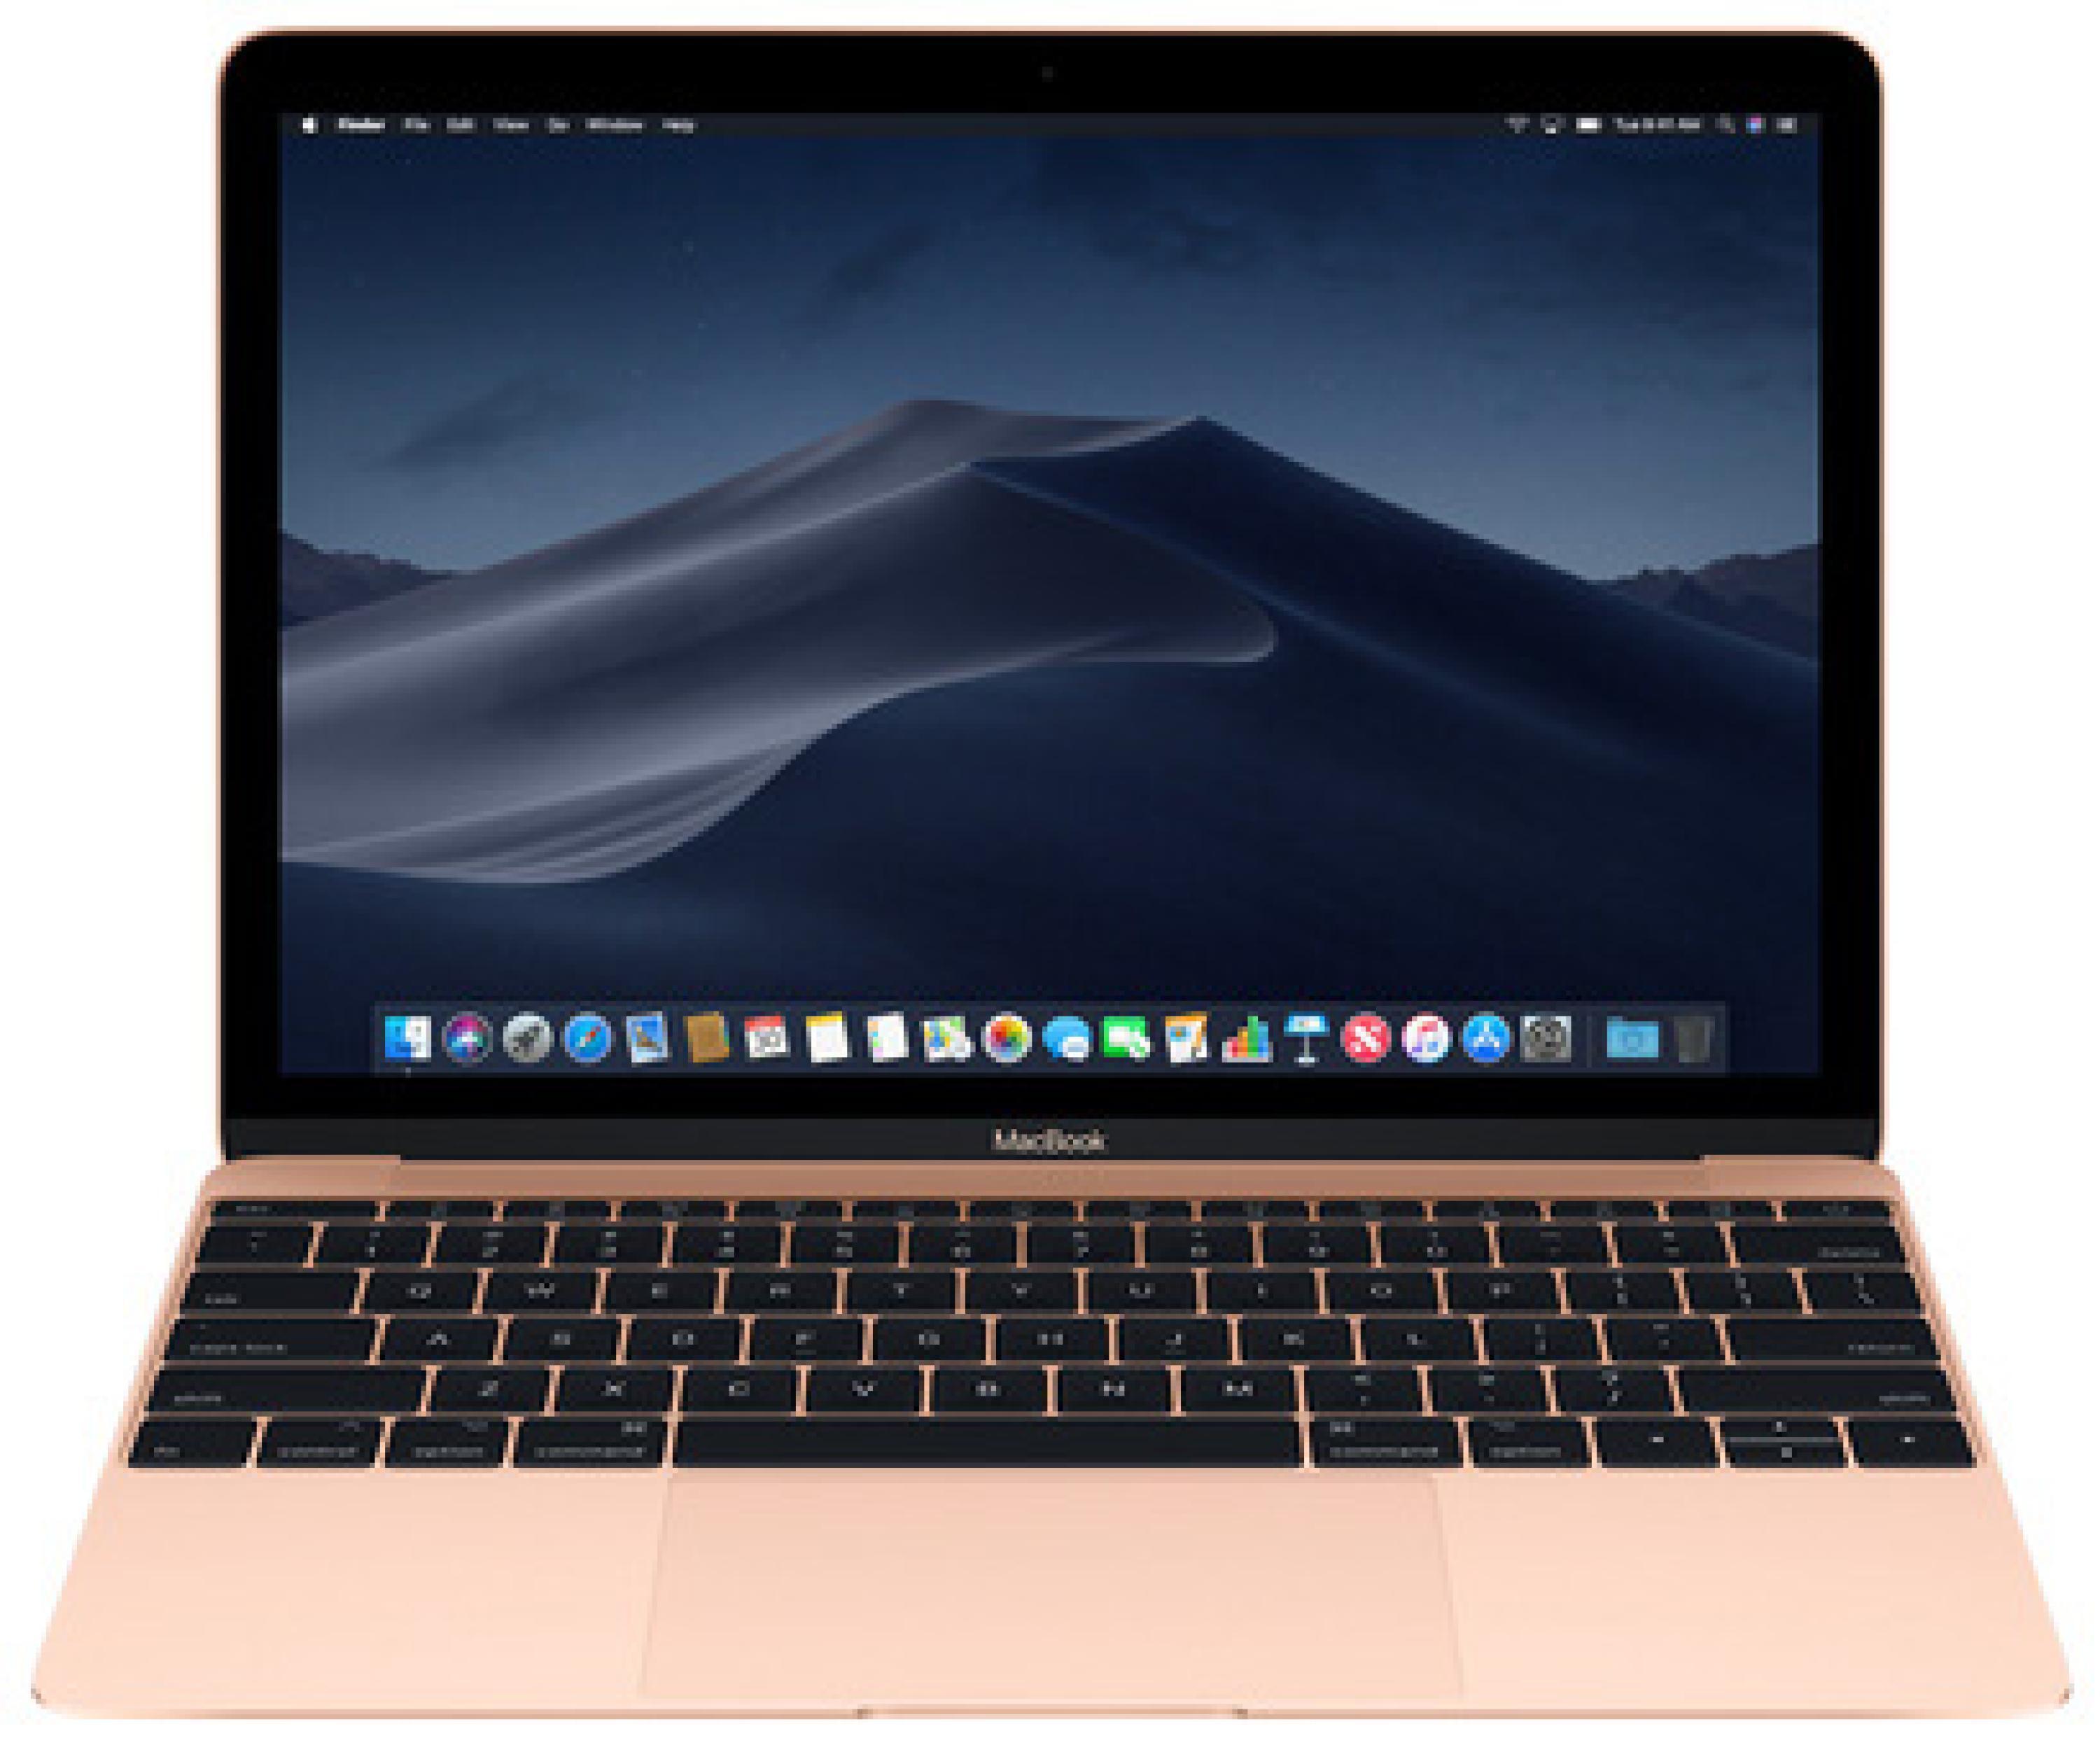 Apple MacBook 1.2GHz Dual-core Intel Core M, 256GB - Gold | Sweetwater